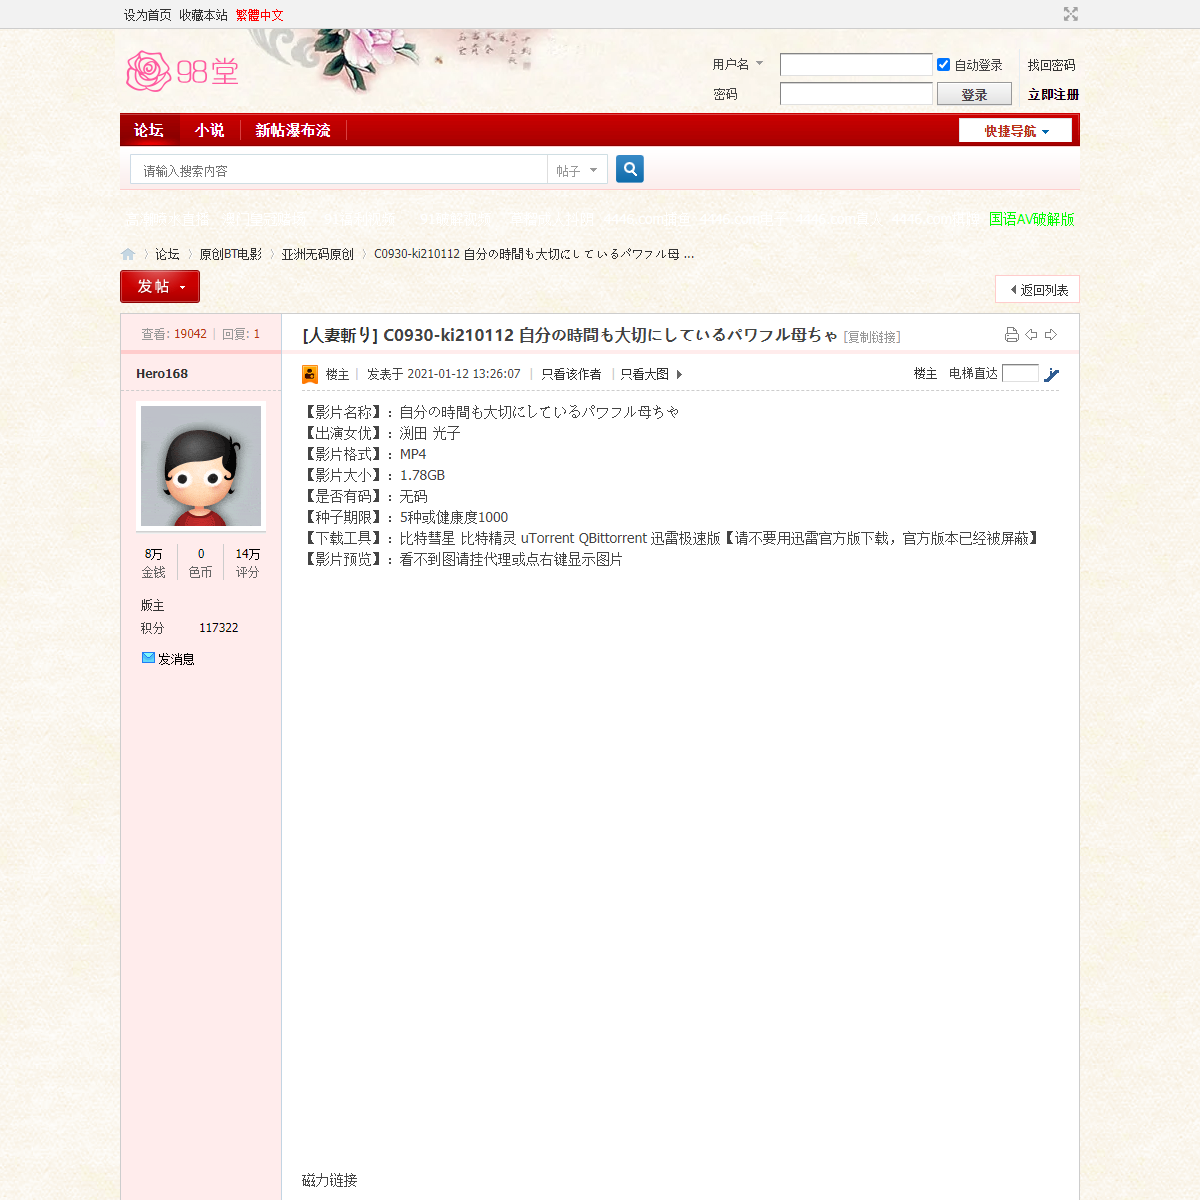 A complete backup of https://www.sehuatang.net/thread-441899-1-1.html